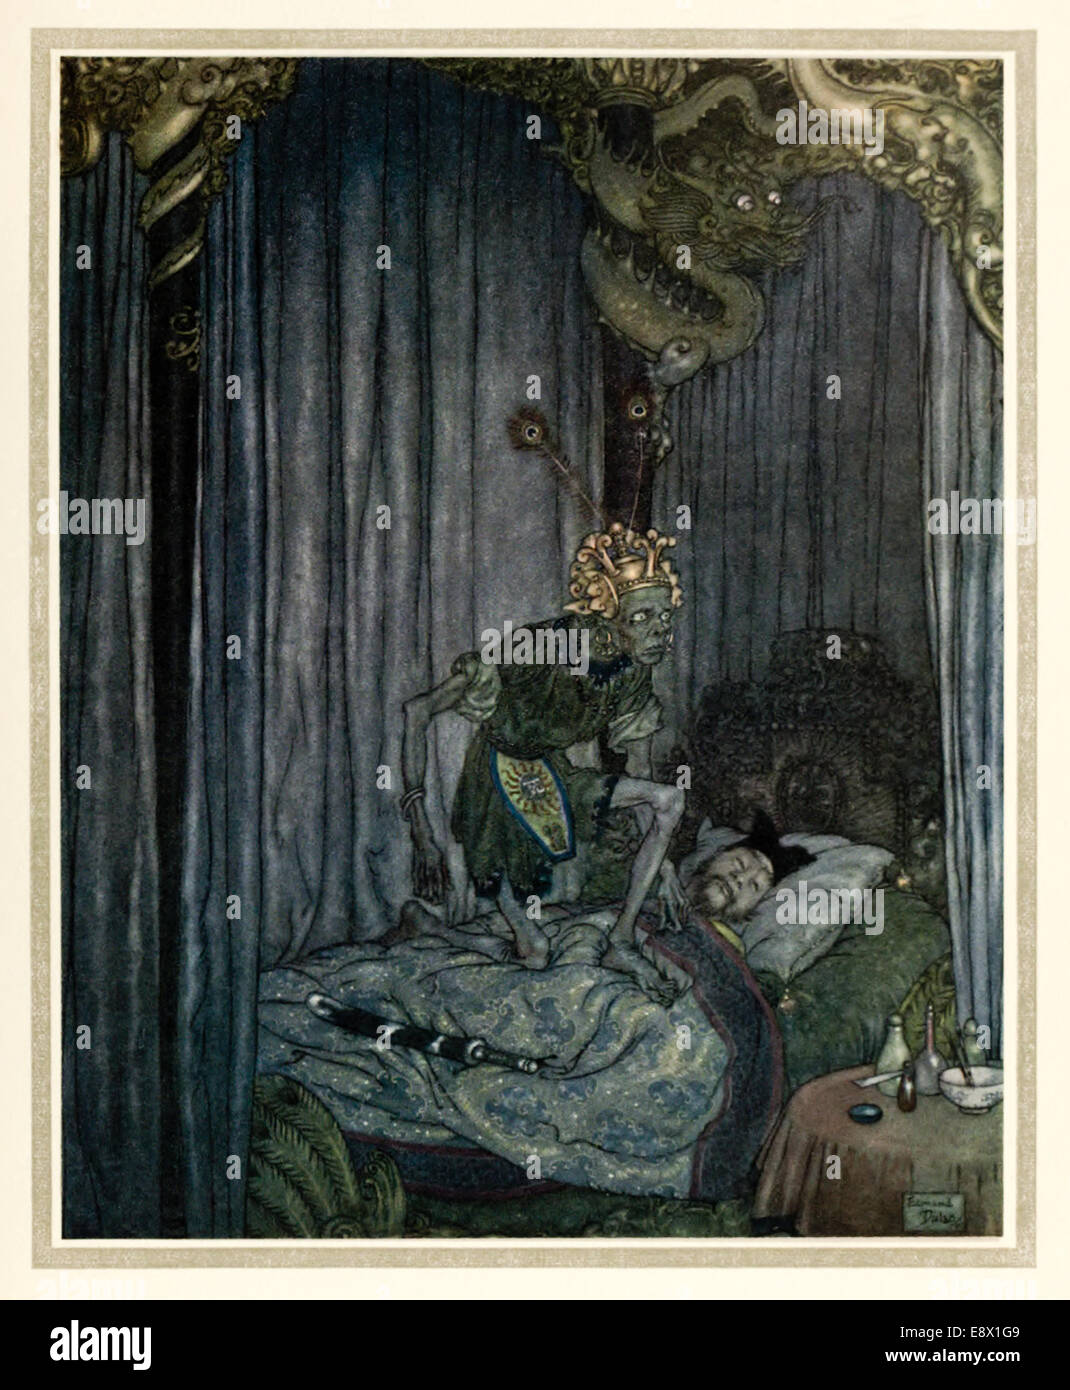 The Nightingale - Edmund Dulac (1882-1953) illustration from ‘Stories from Hans Andersen’. See description for more information. Stock Photo